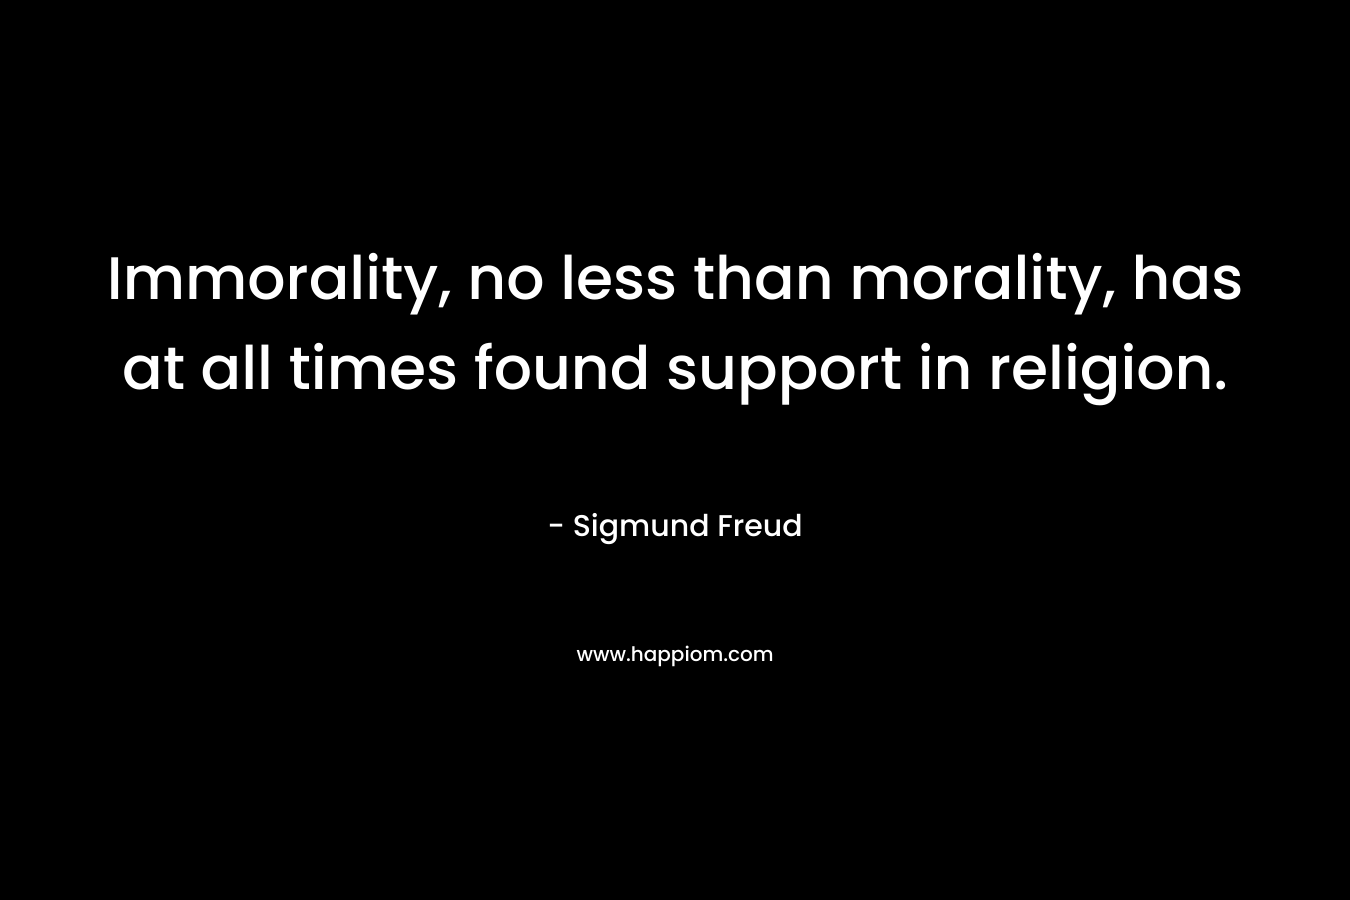 Immorality, no less than morality, has at all times found support in religion.